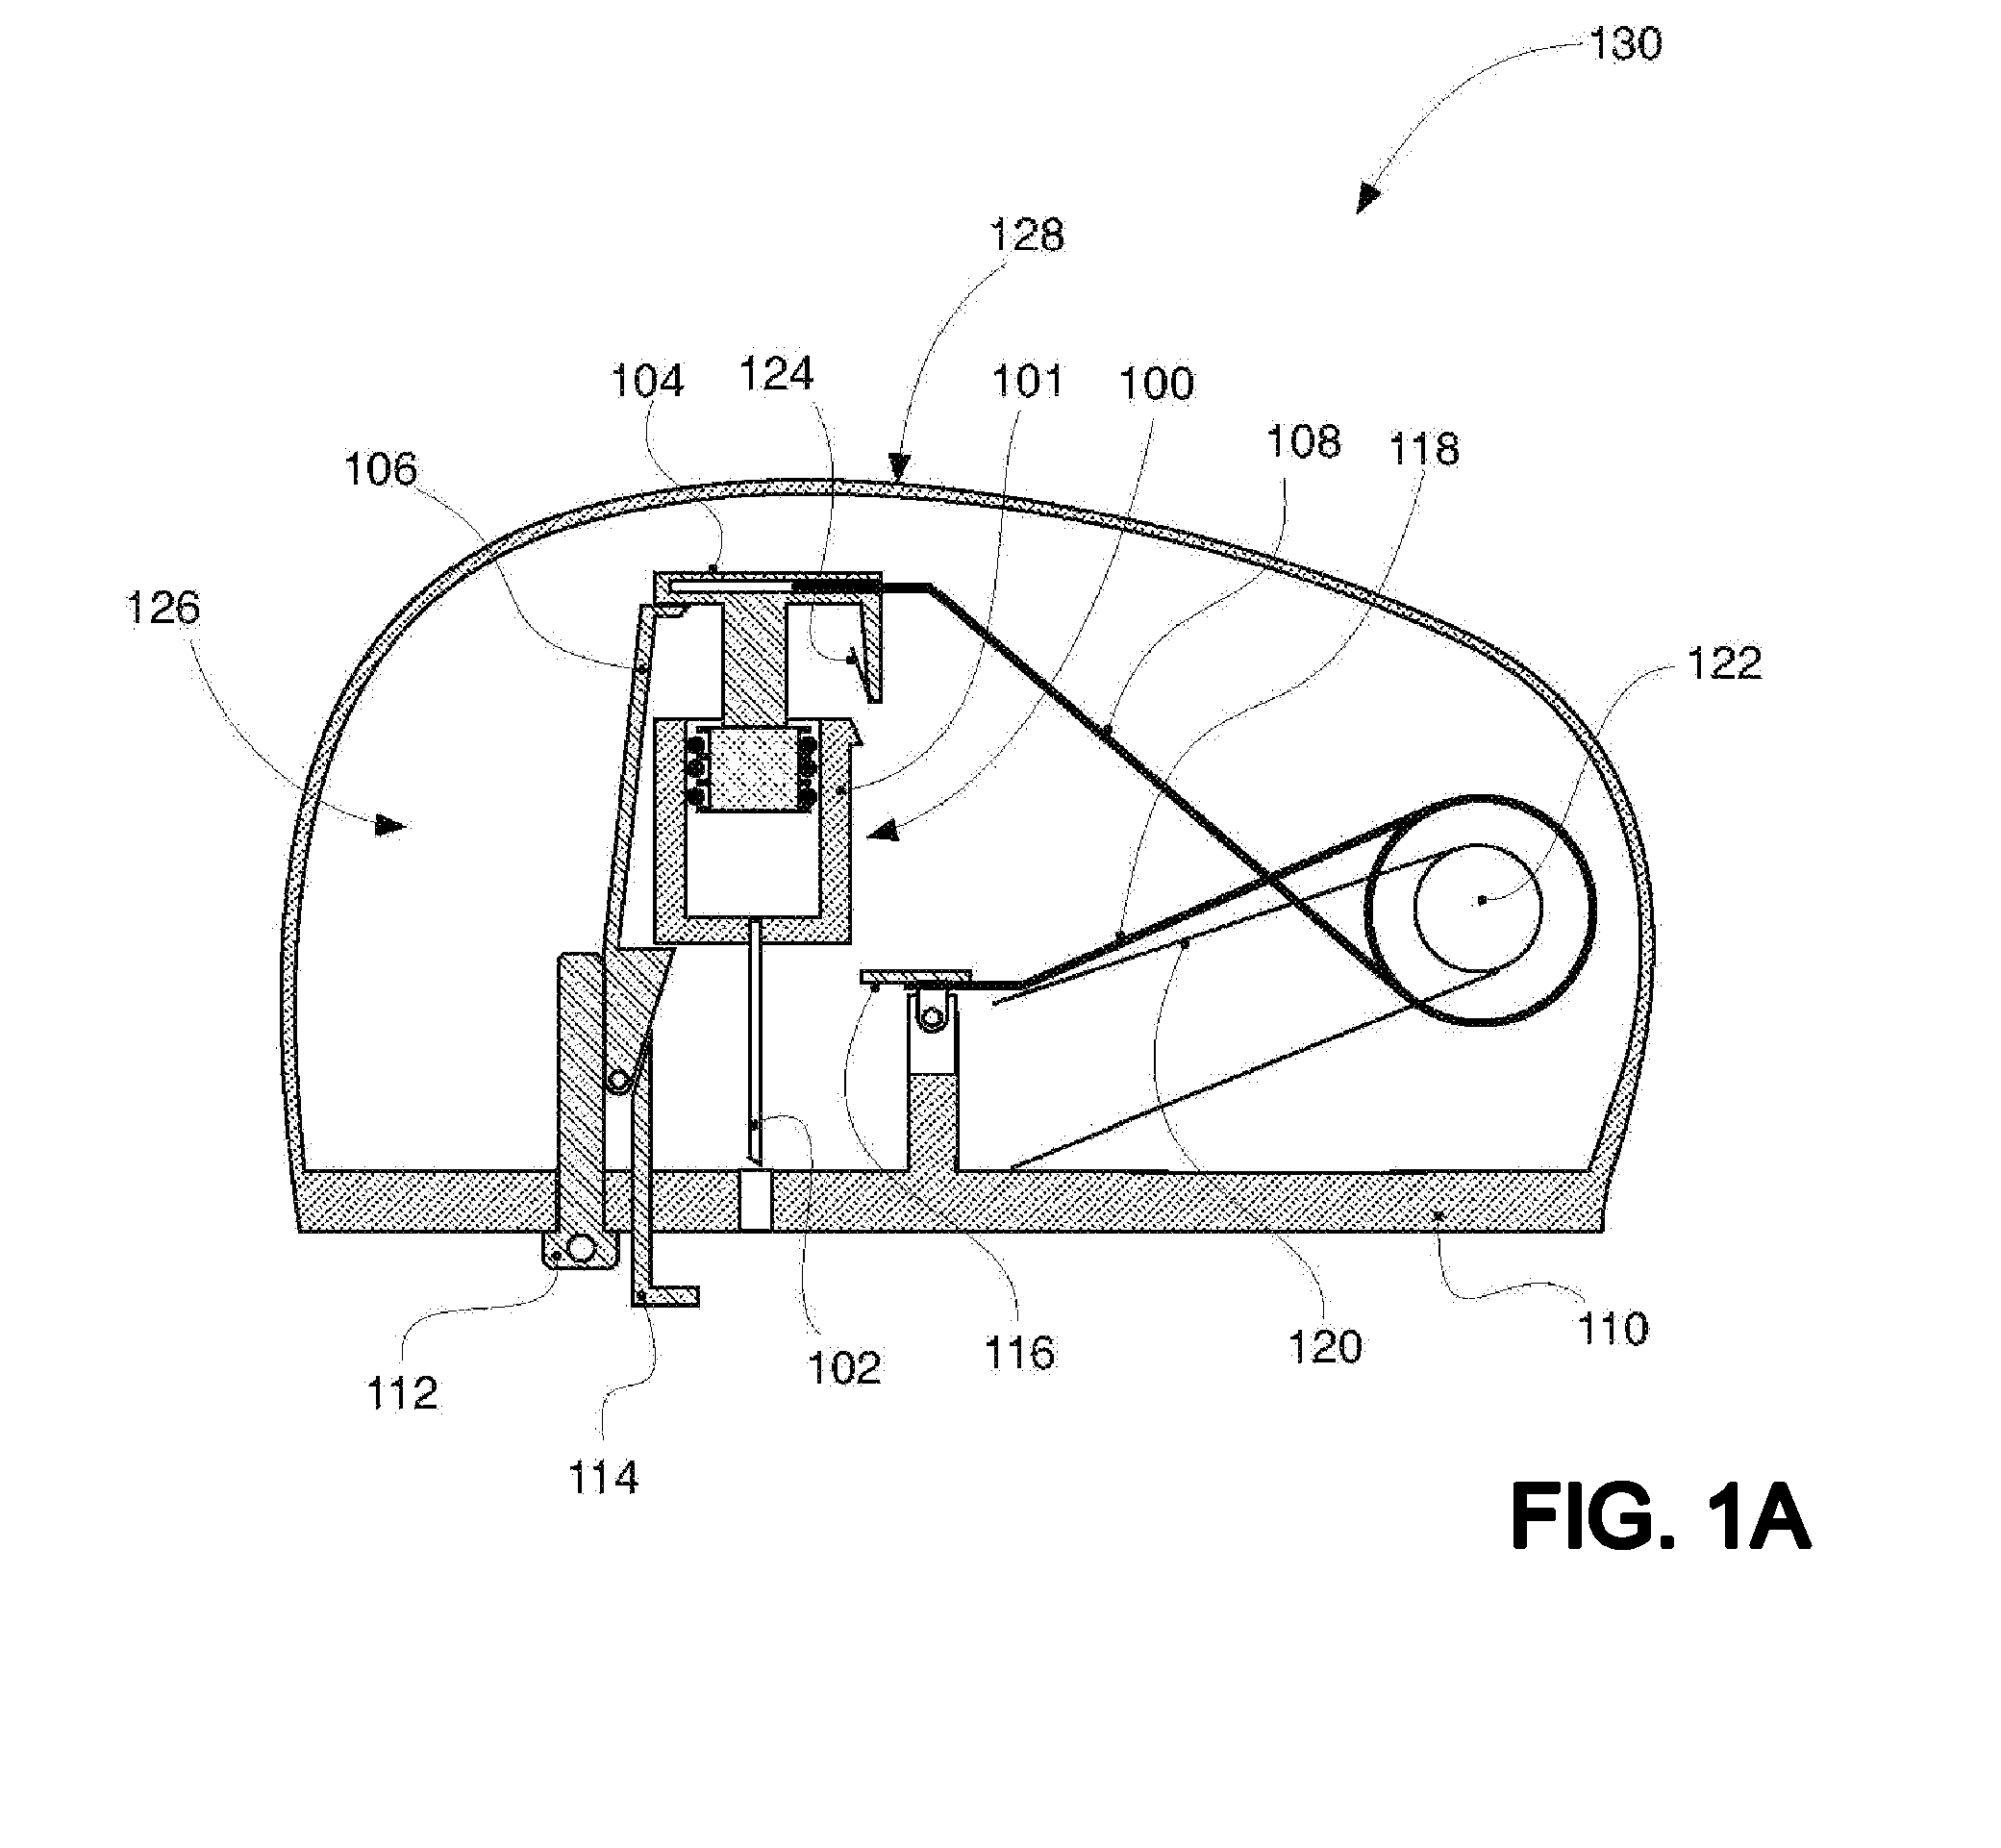 Palm-based injector actuation and safety surfaces